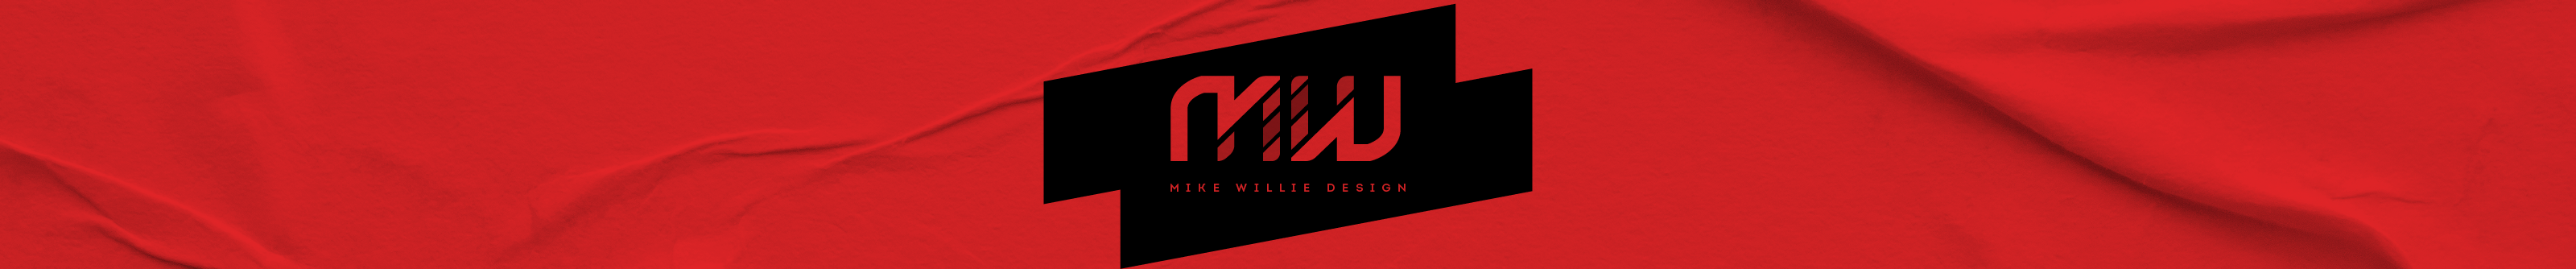 Mike Willie's profile banner